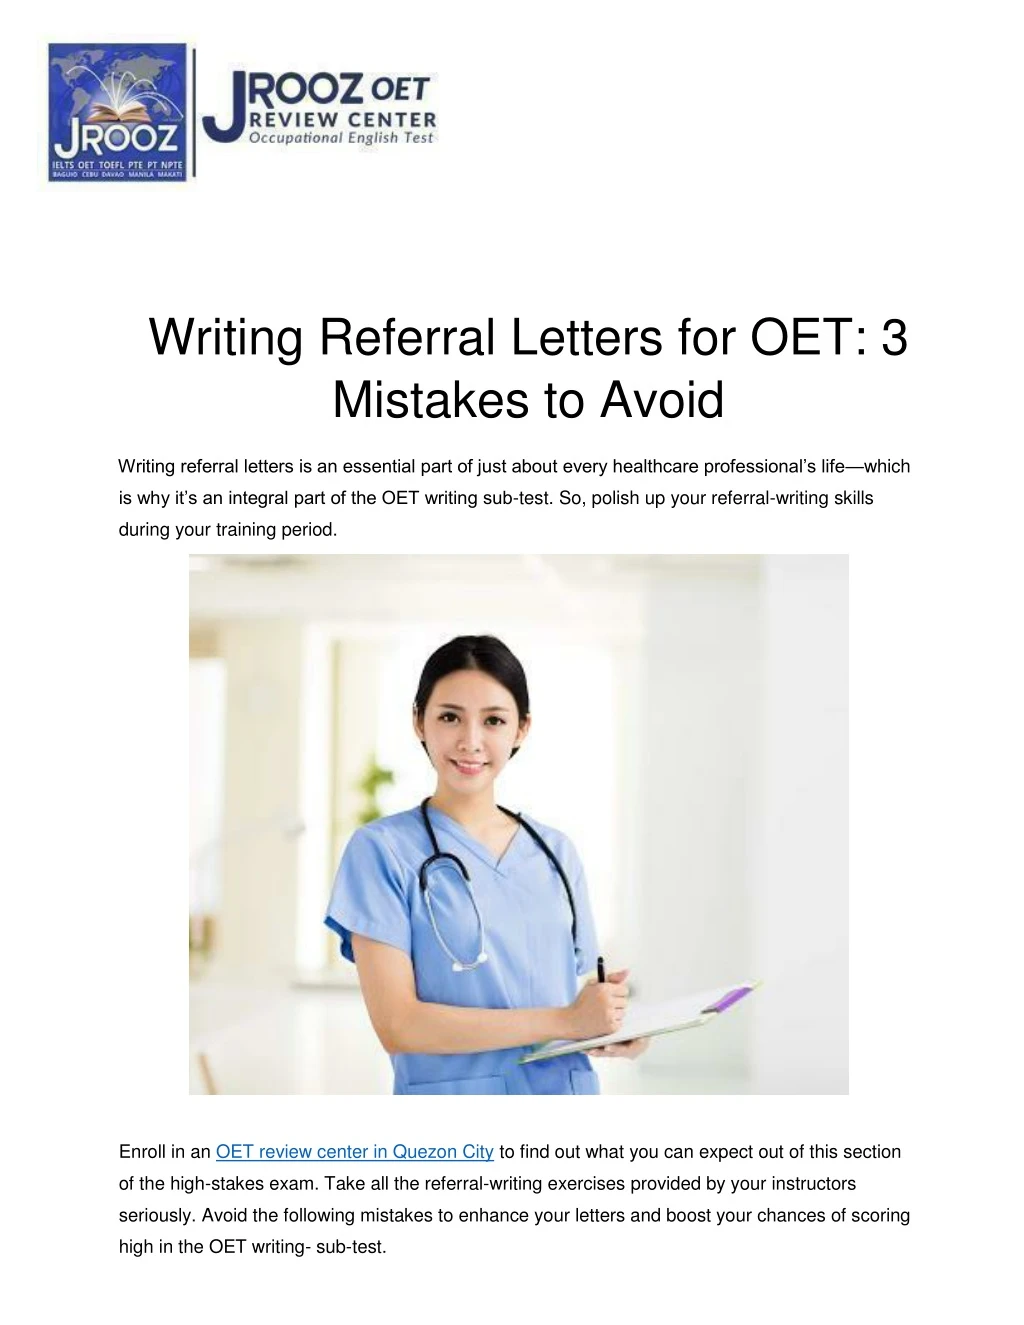 writing referral letters for oet 3 mistakes